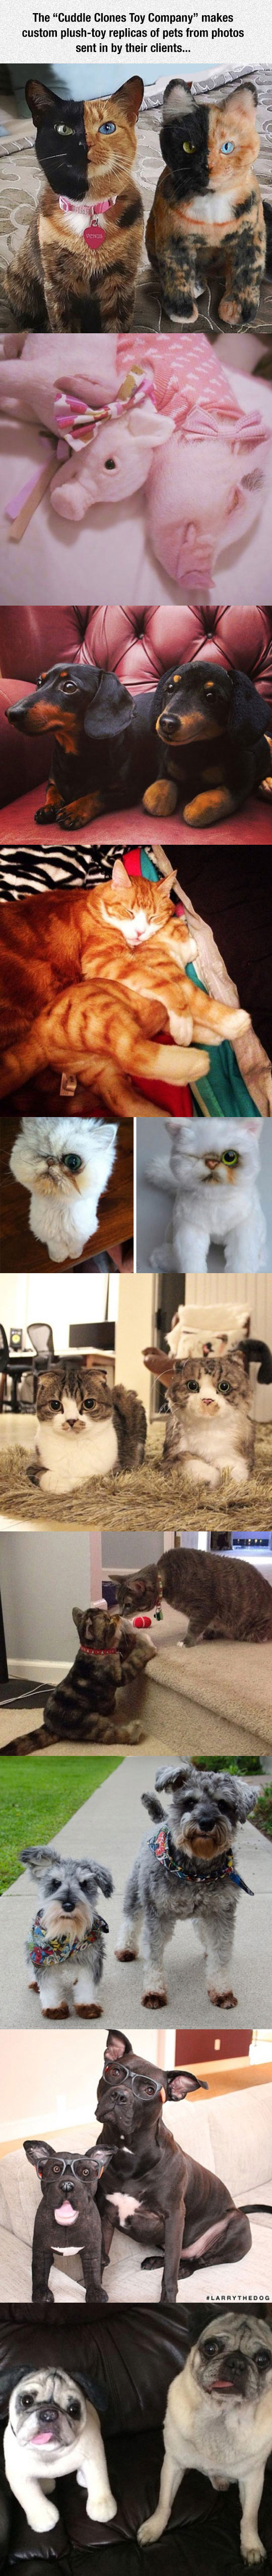 This Company Makes Plush Toy Copies Of Your Pets